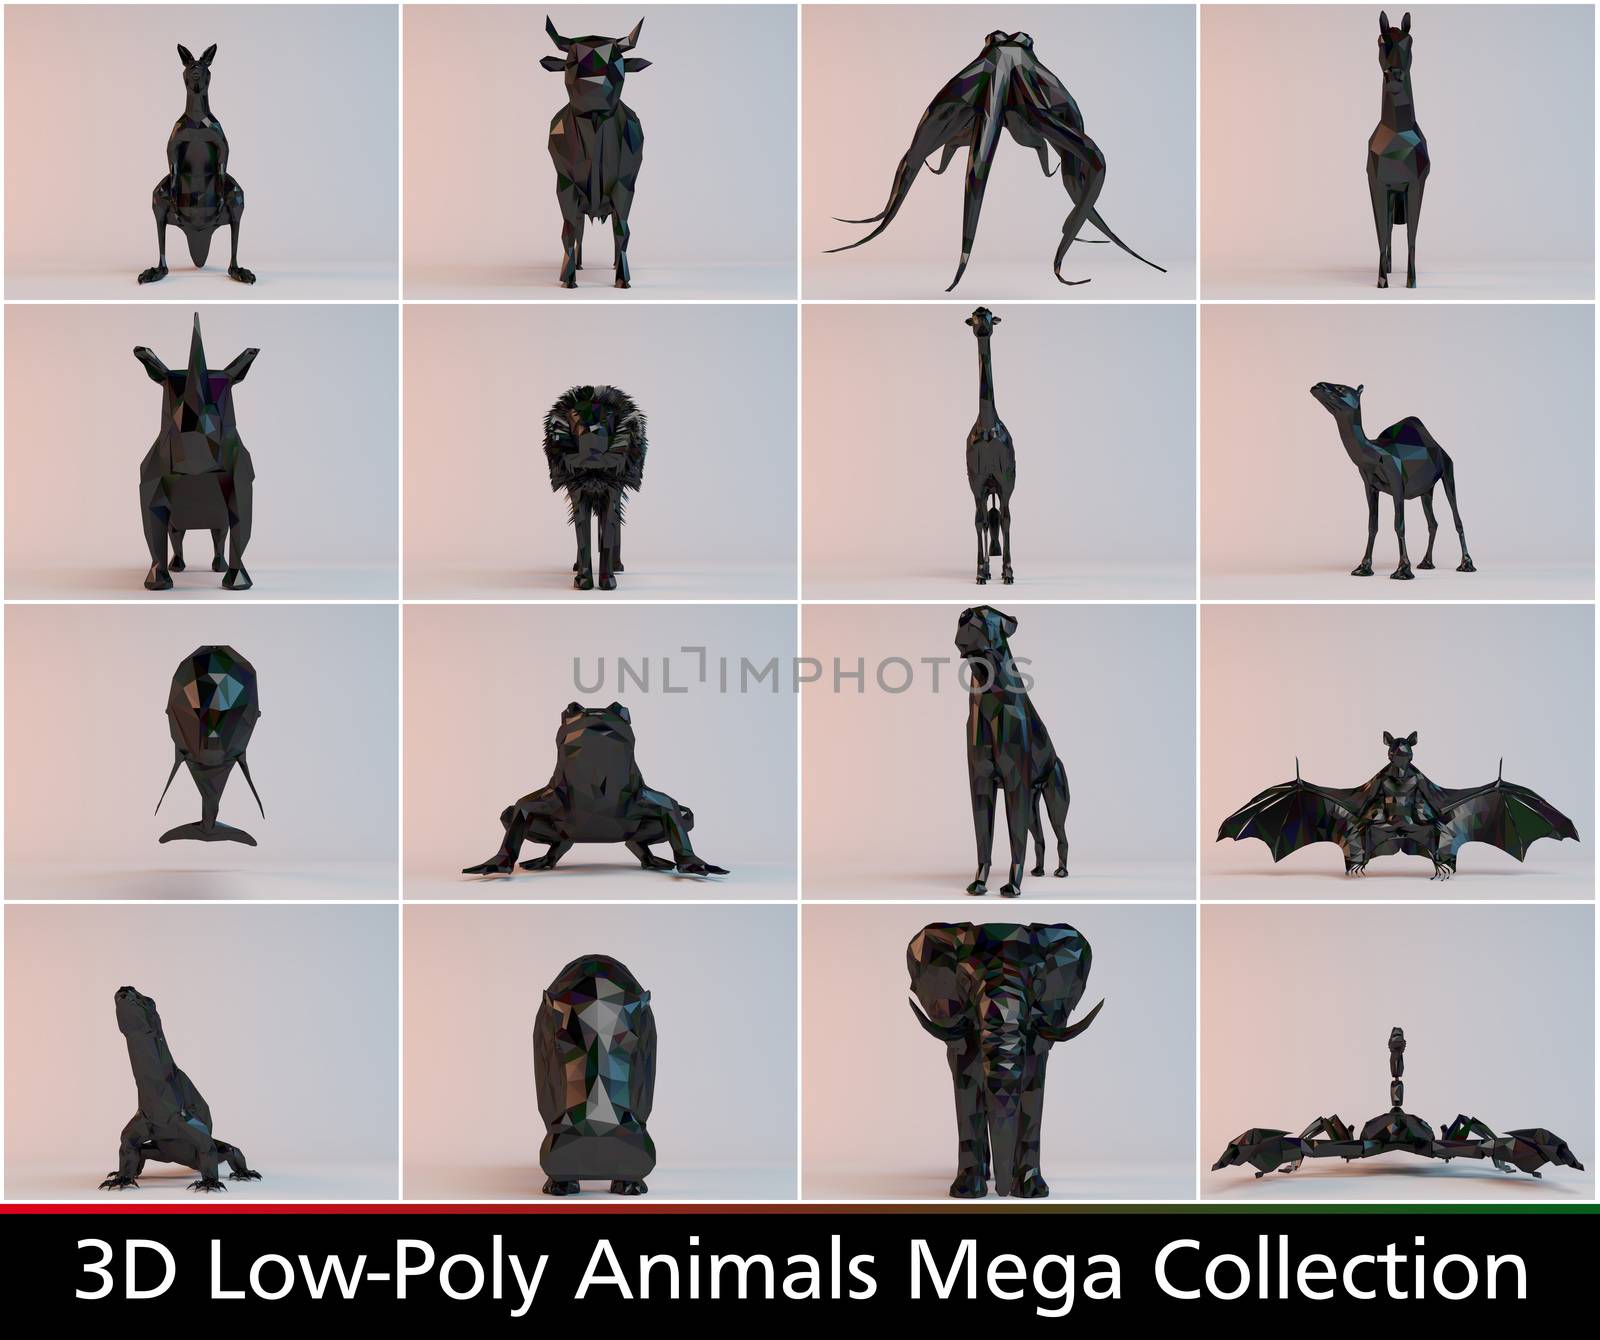 3d low poly animals collections with different kinds such as lion a horse a camel an elephant an much more